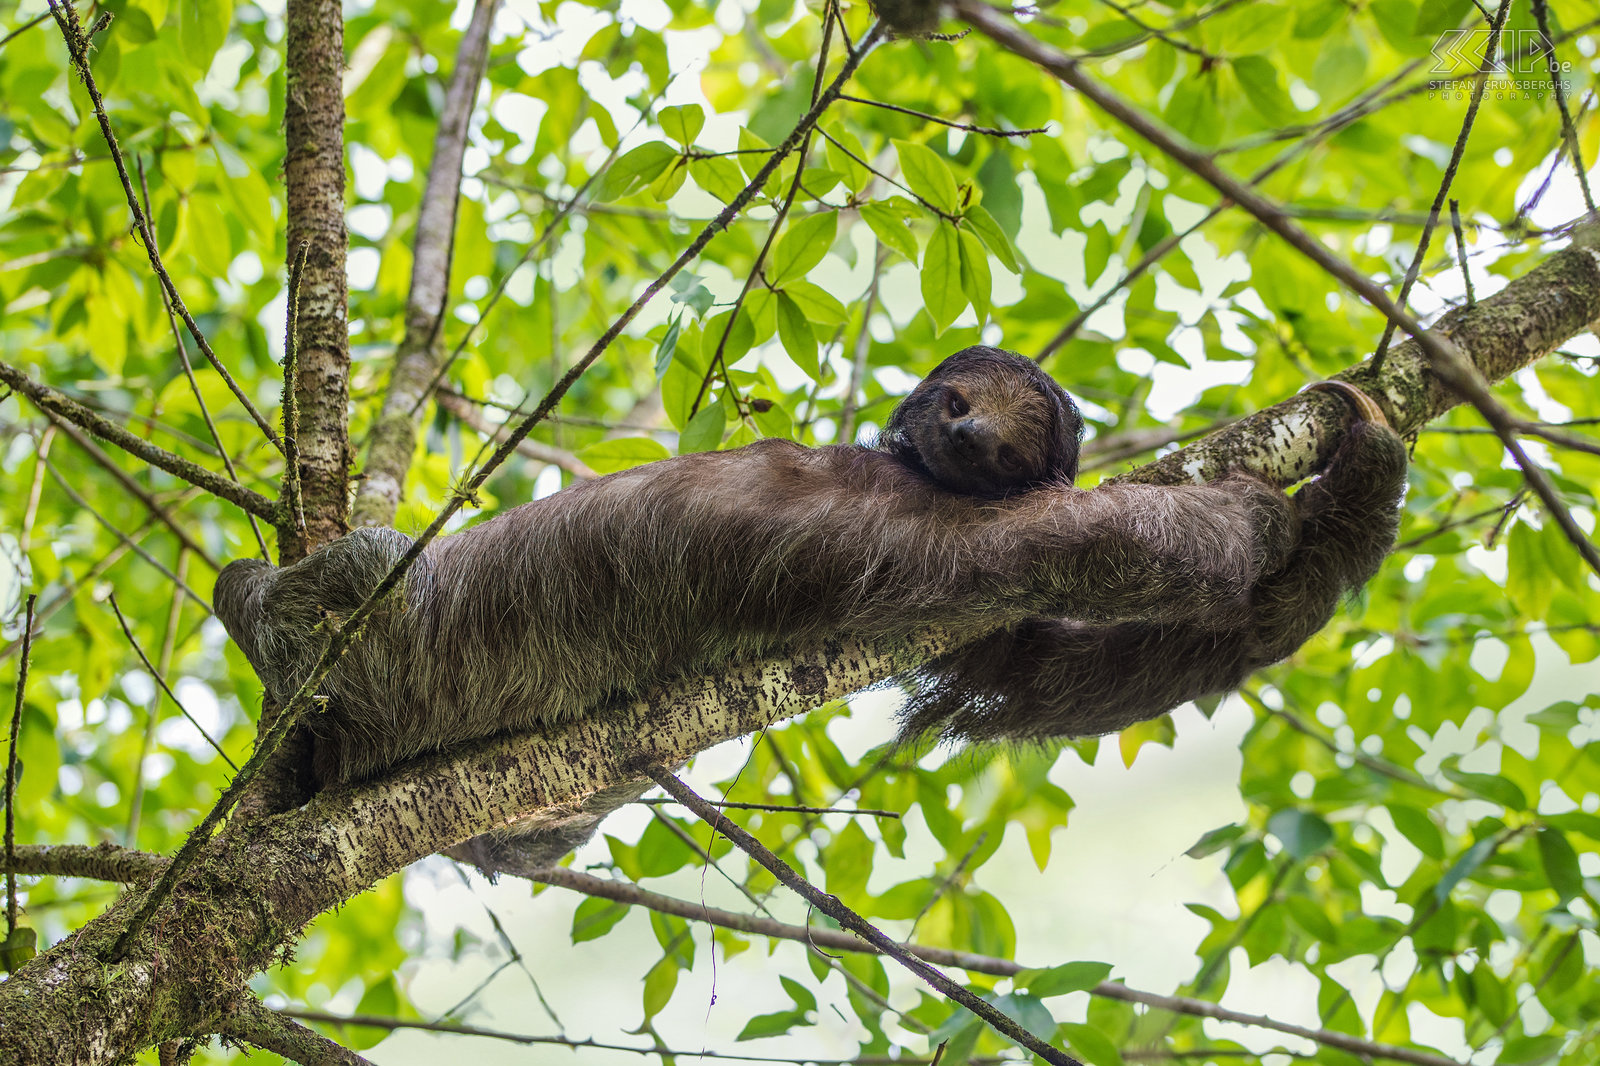 La Selva - Three-toed sloth A three-toed sloth (bradypus) in the jungle of La Selva Biological. These sloths have short tails of 6-7 cm and  three clawed toes on each limb. Their body is adapted to hang by their limbs and they move very slow.  Stefan Cruysberghs